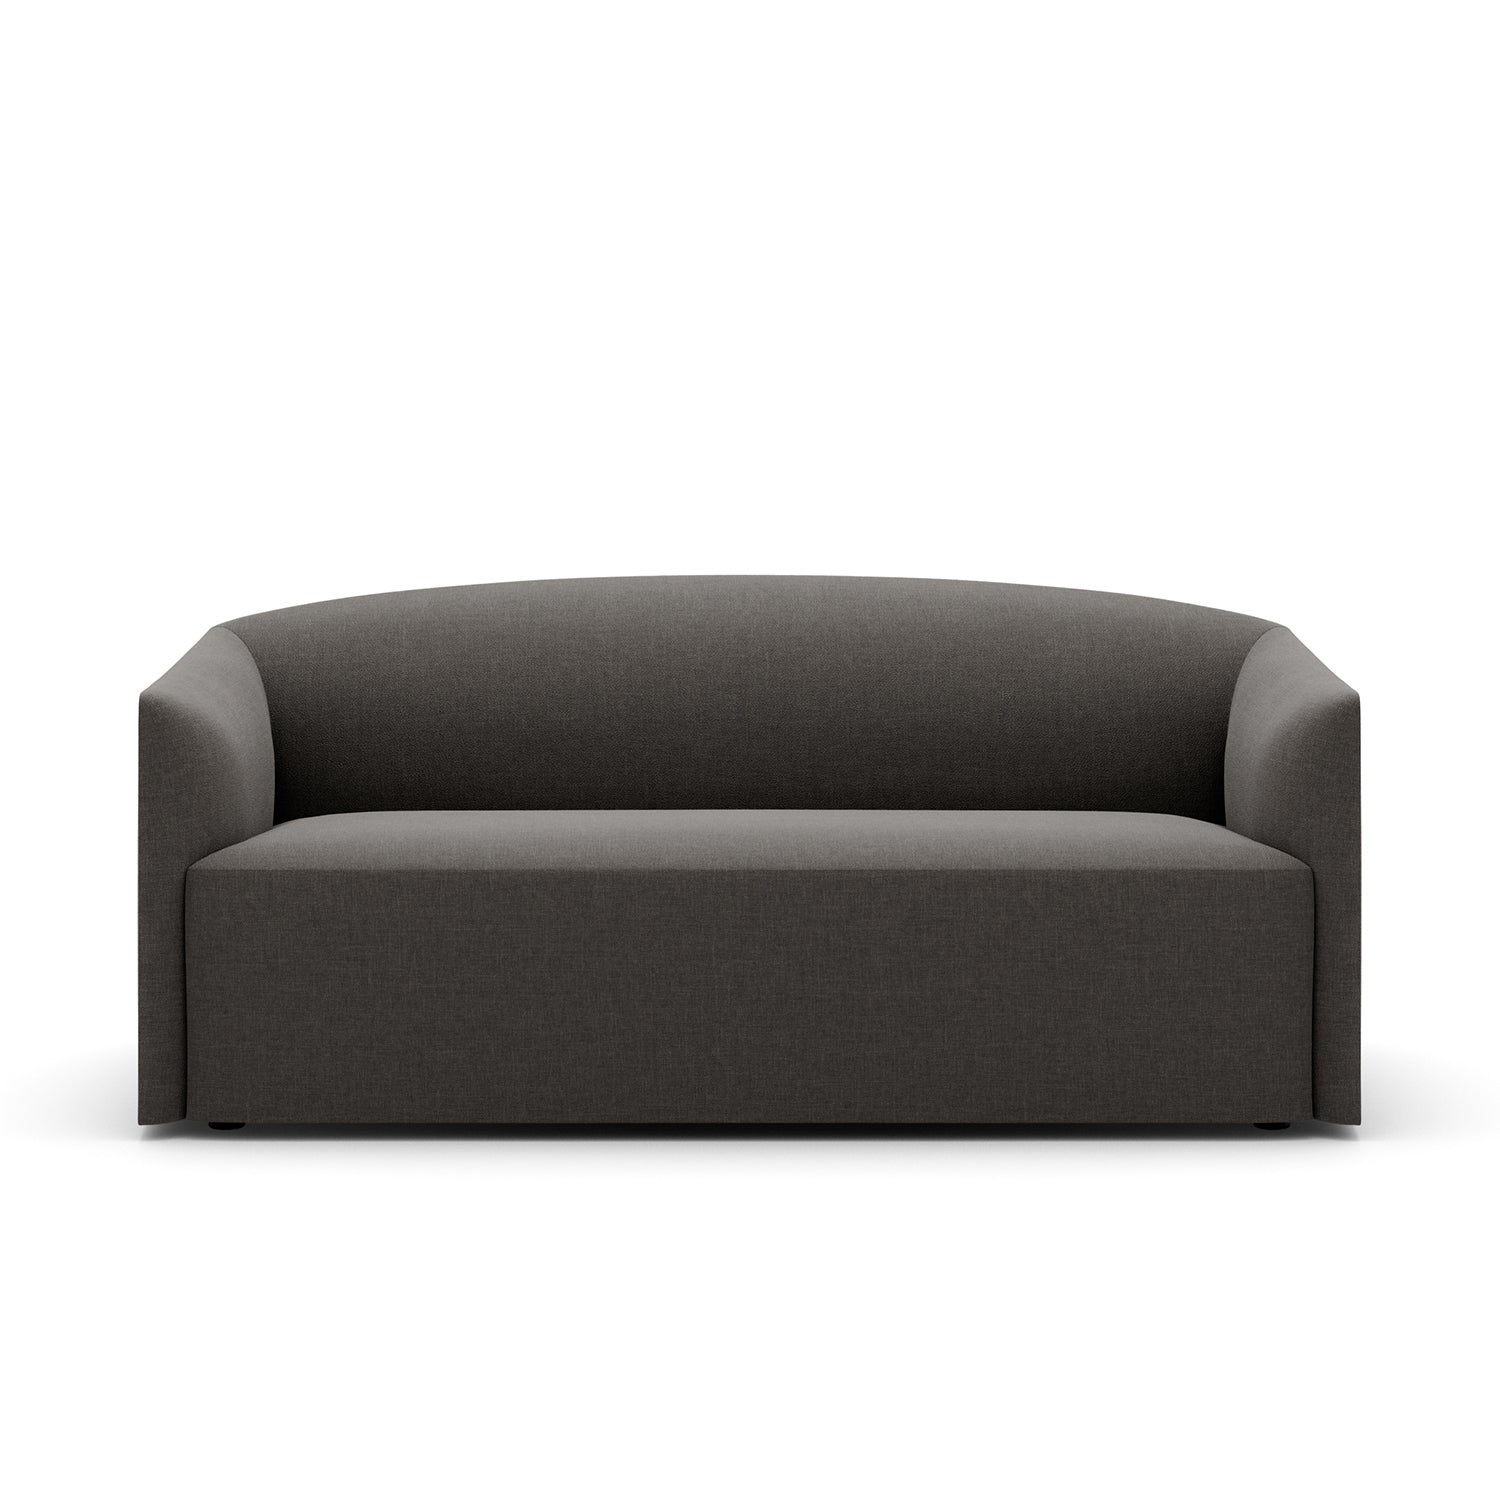 New Works Shore 2 Seater Sofa in lava rock